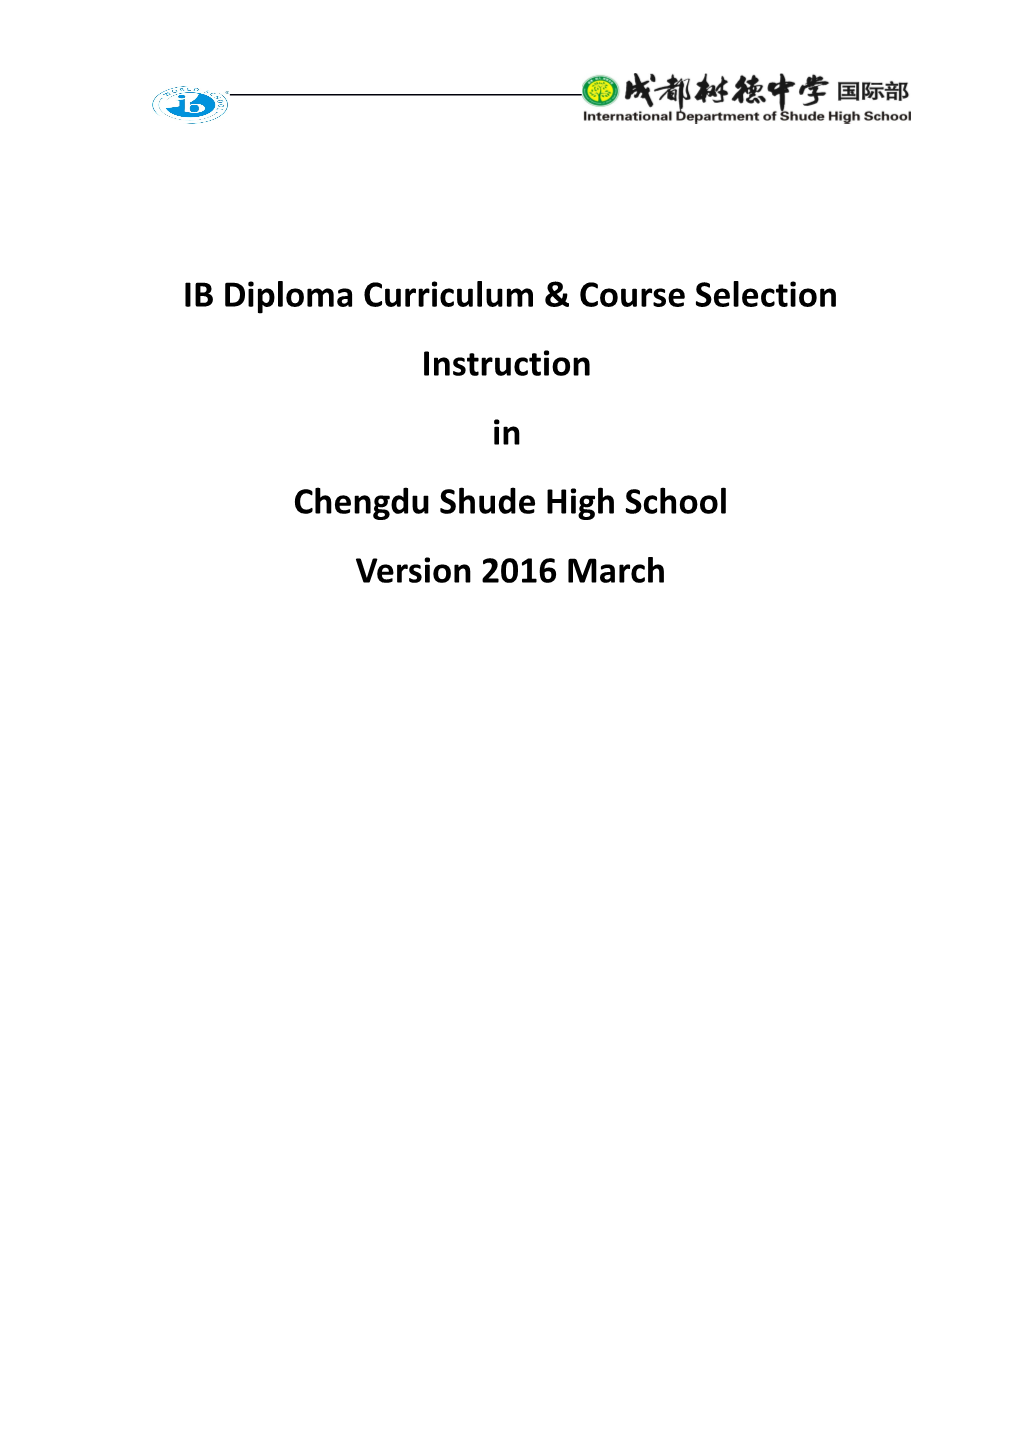 IB Diploma Curriculum & Course Selection Instruction